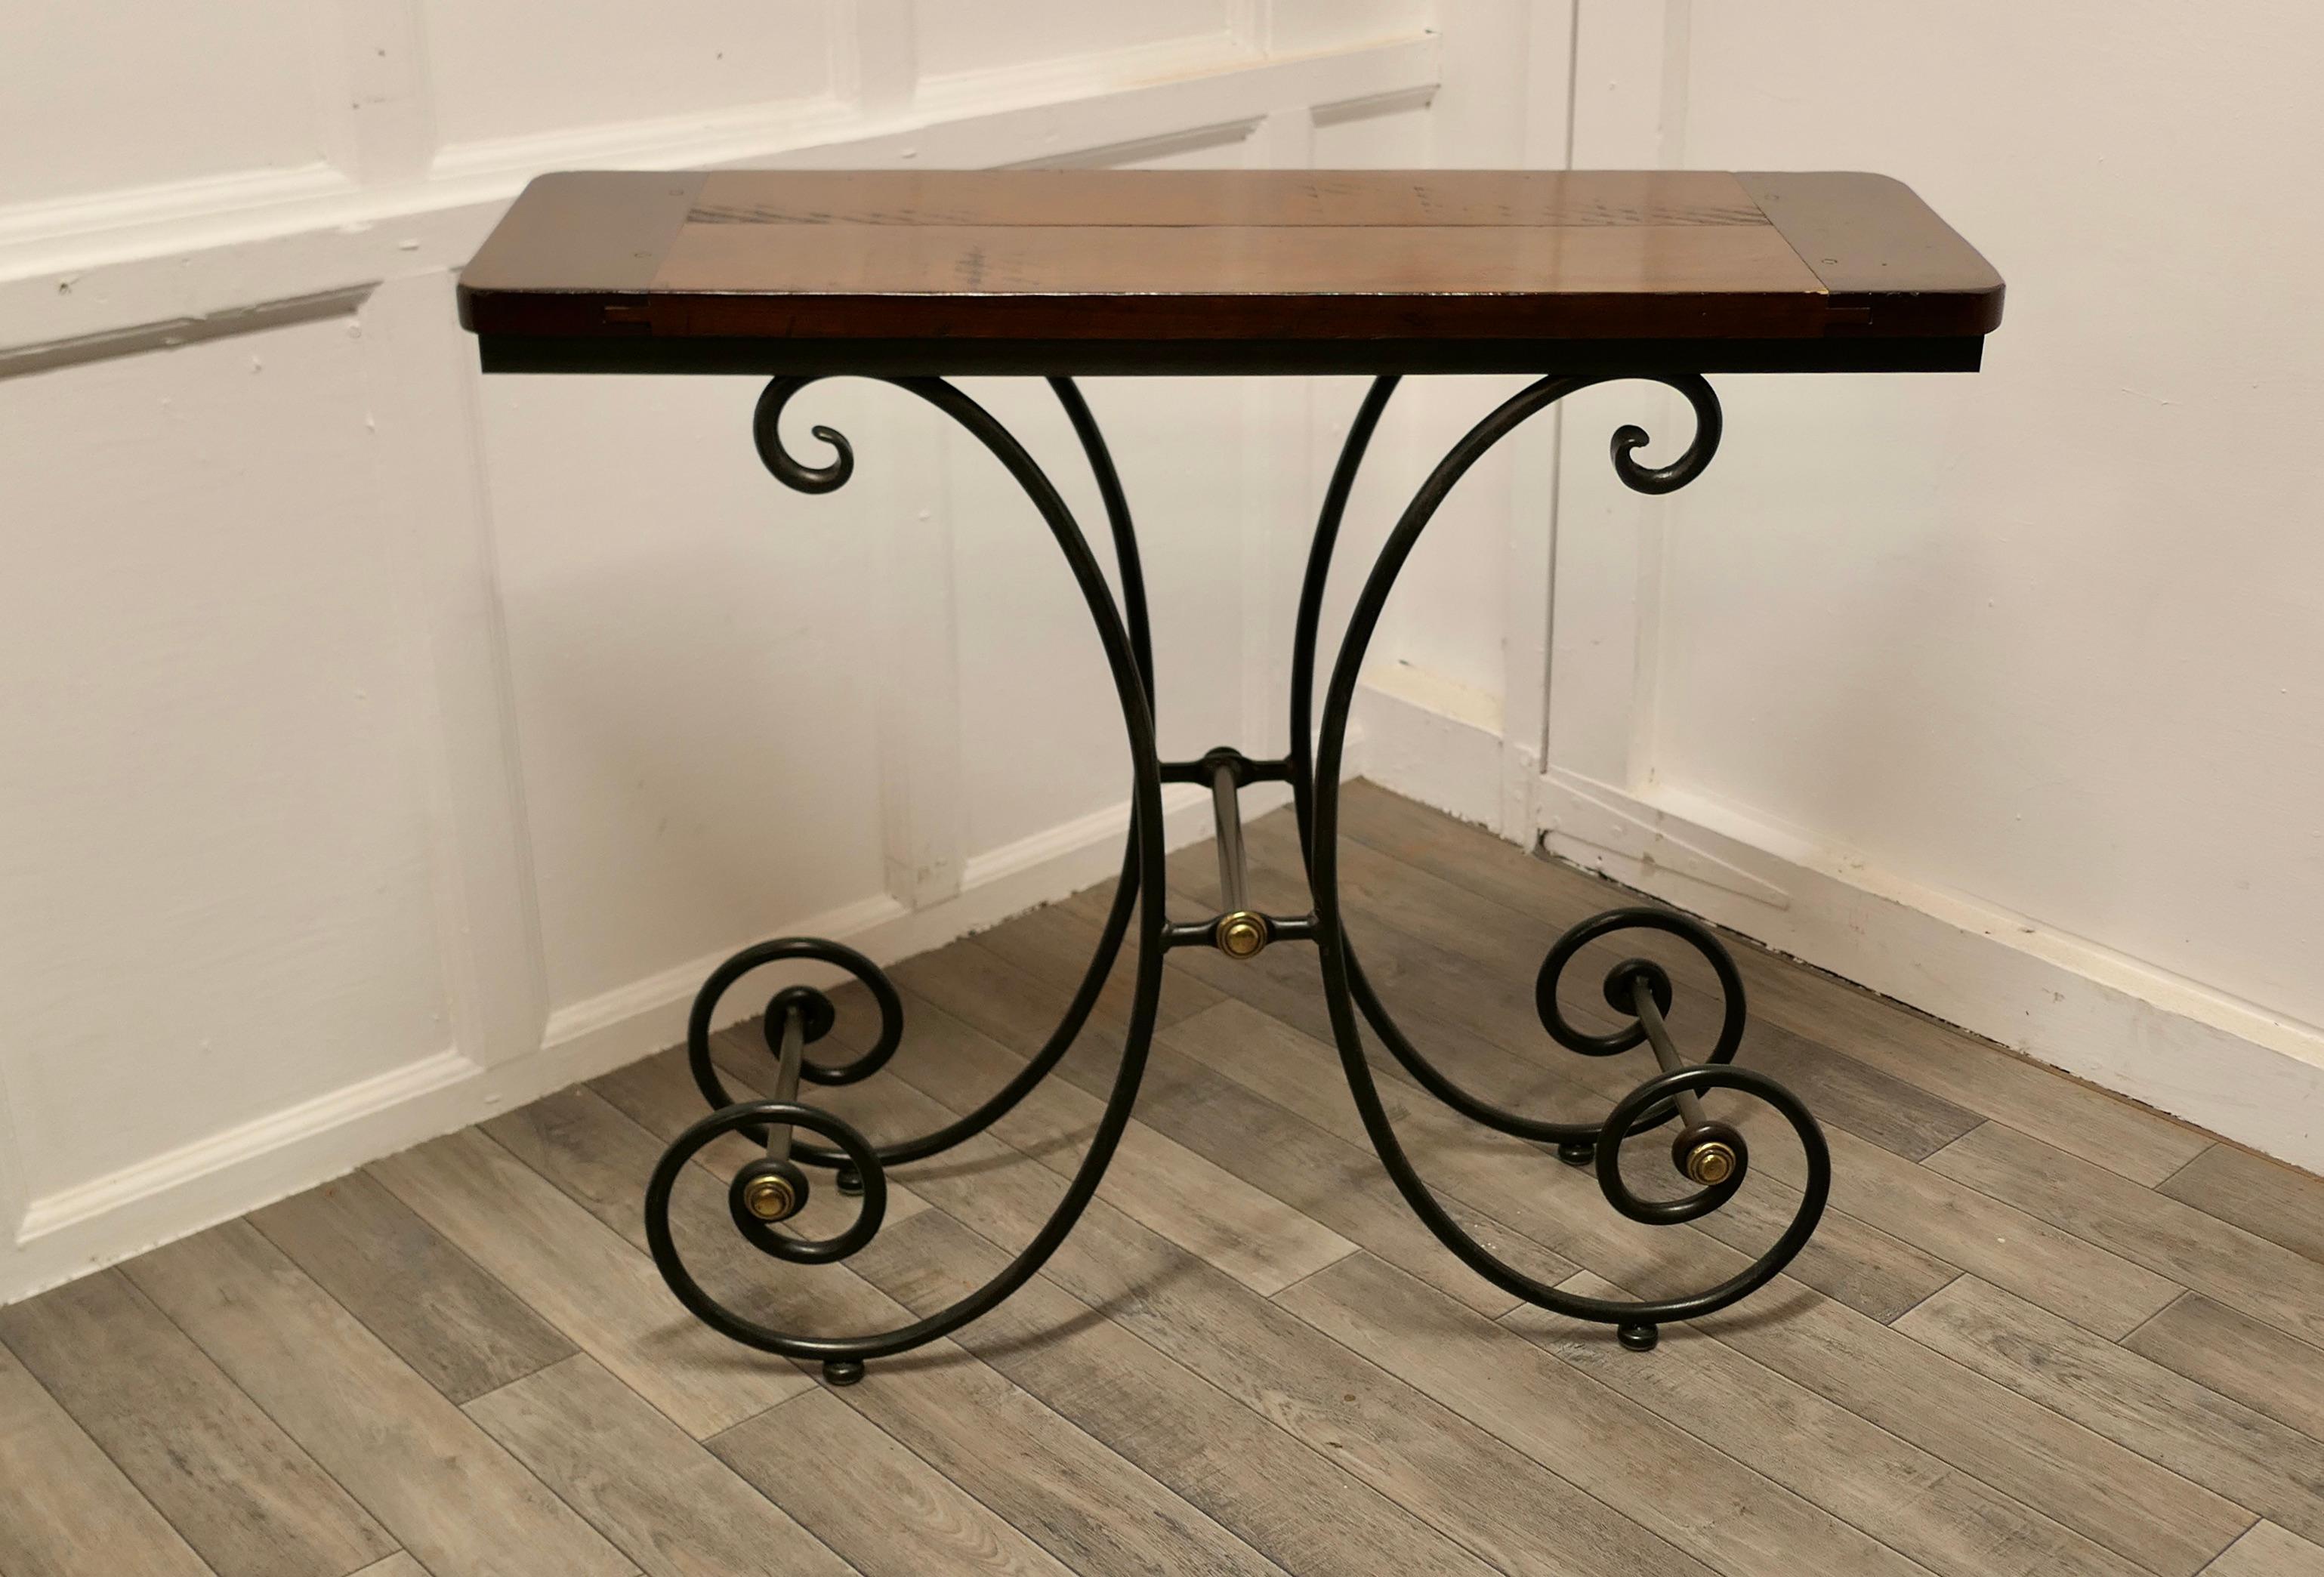 A stylish iron and elm console table.

 This is a lovely table has been designed in the style French bakers stand, it has the classic deeply curved legs we associate with those French Boulanger or Pâtisserie pieces. The base is forged in wrought